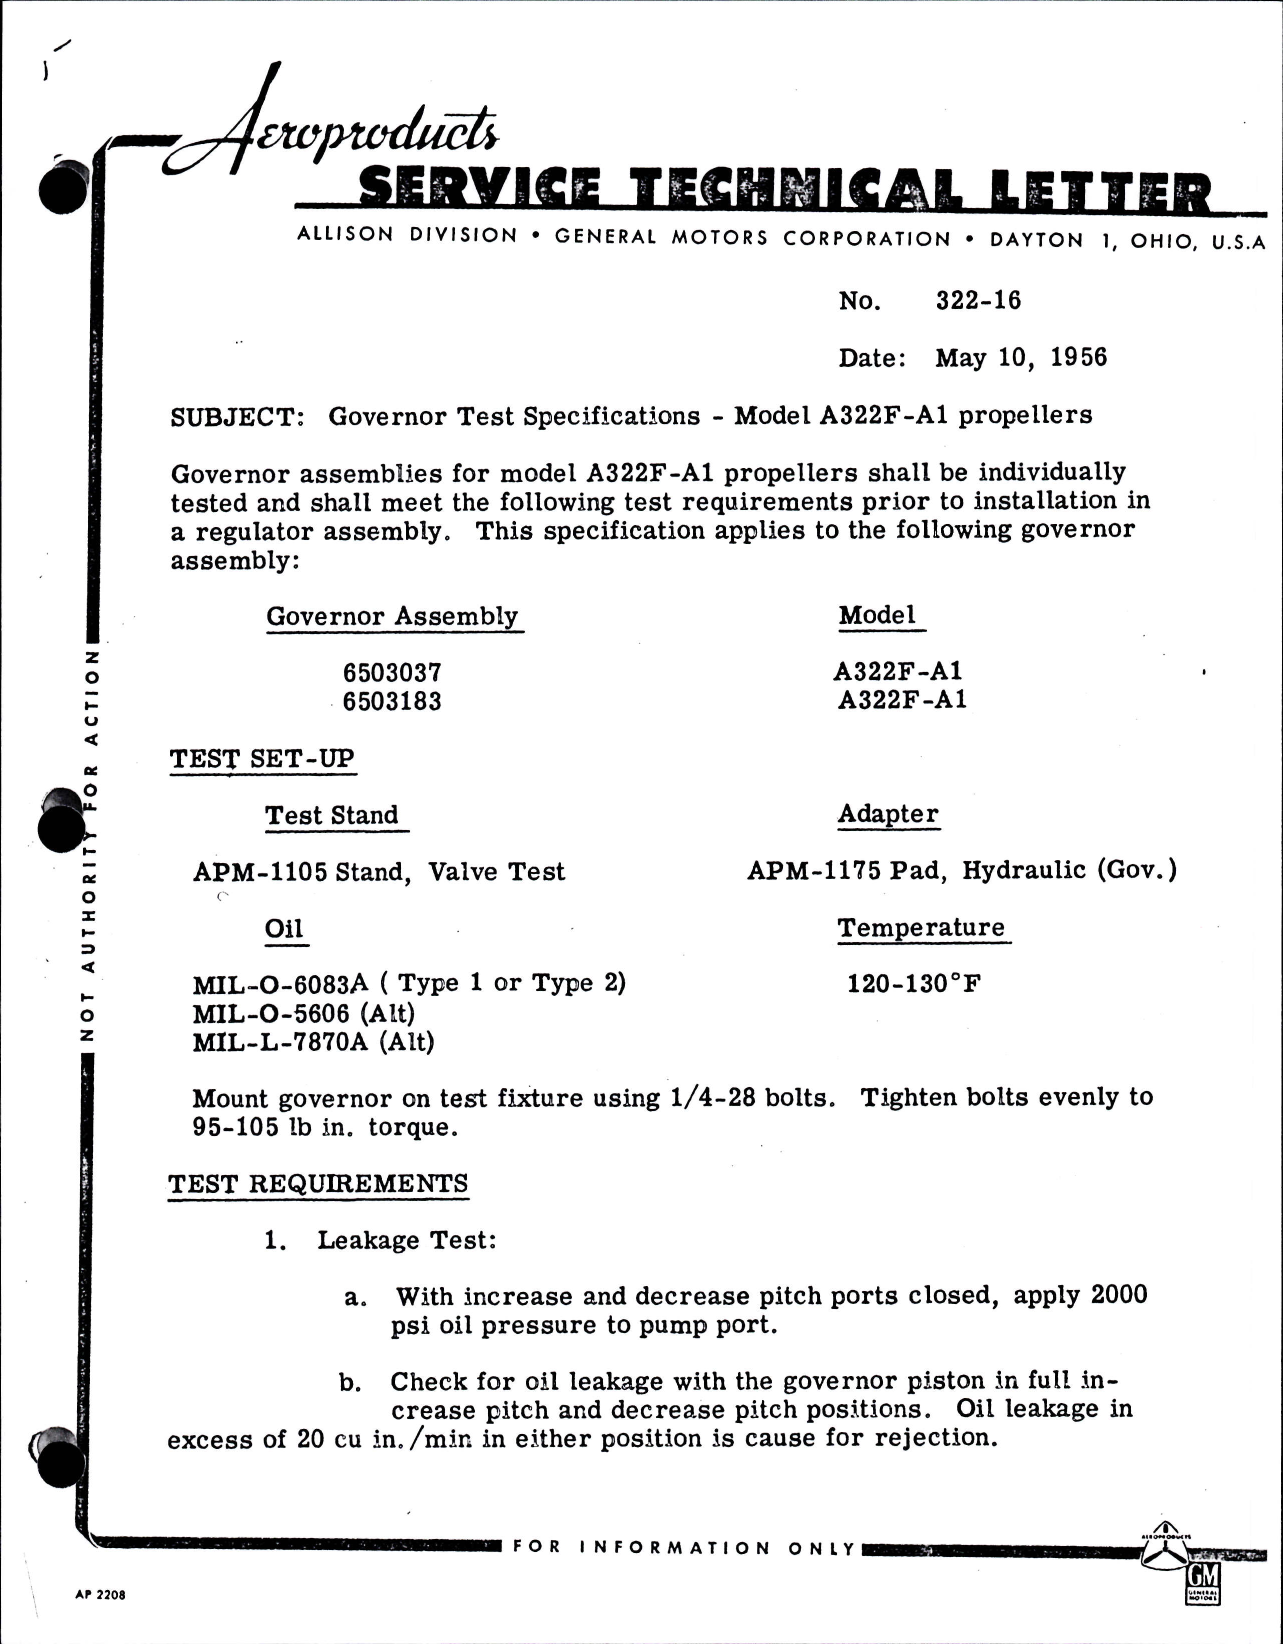 Sample page 1 from AirCorps Library document: Governor Test Specifications for Model A322F-A1 Propellers